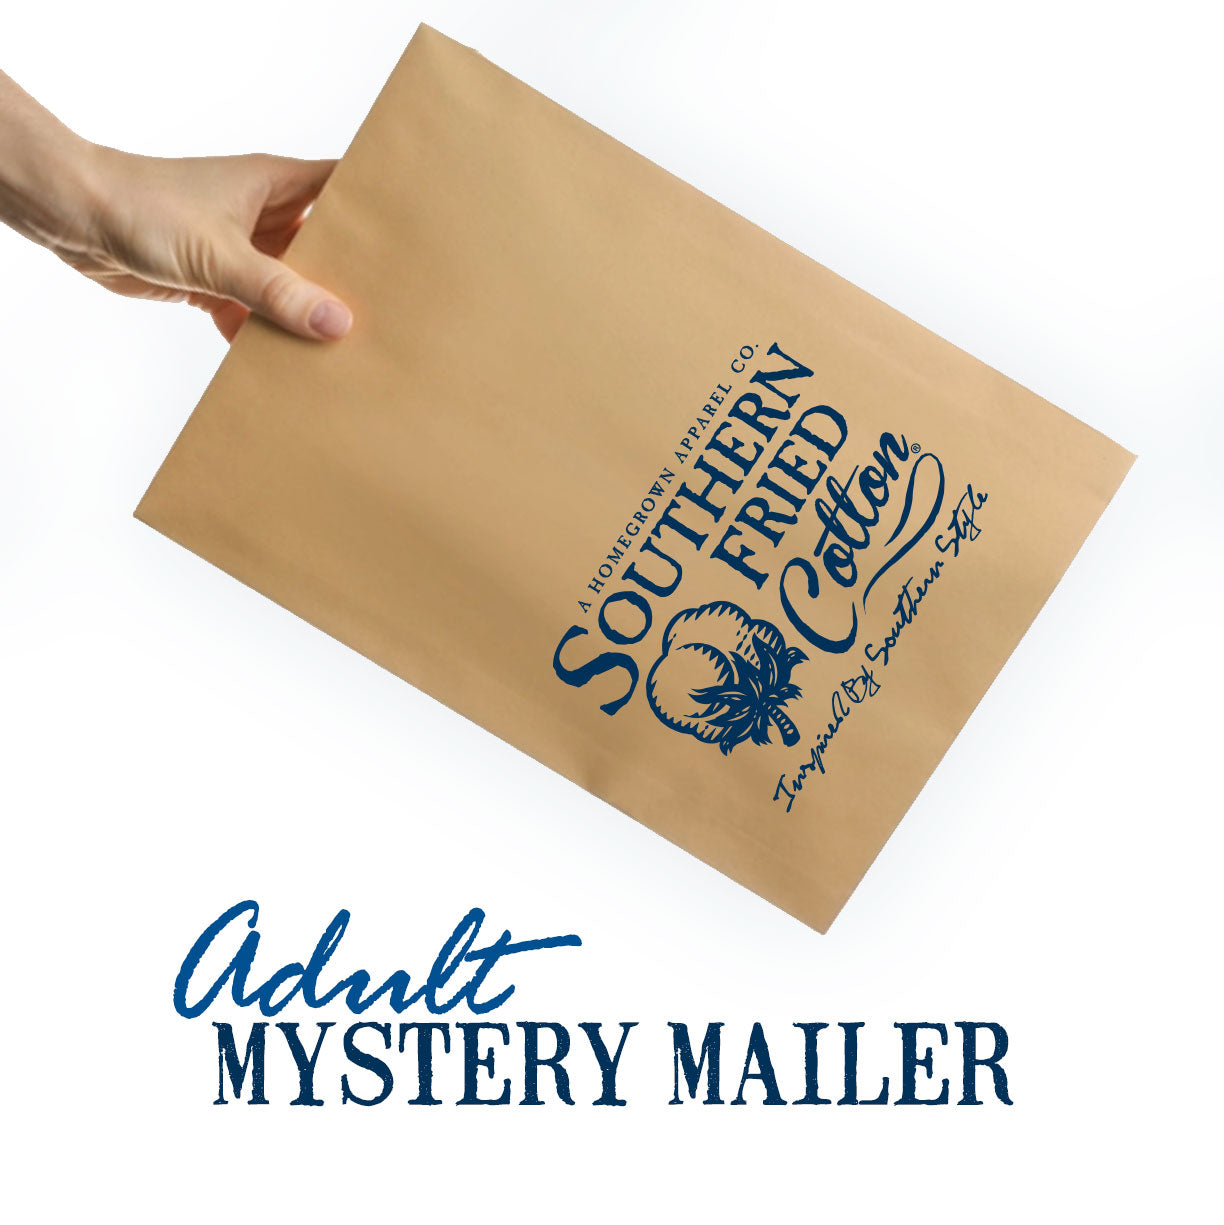 Adult Mystery Mailer